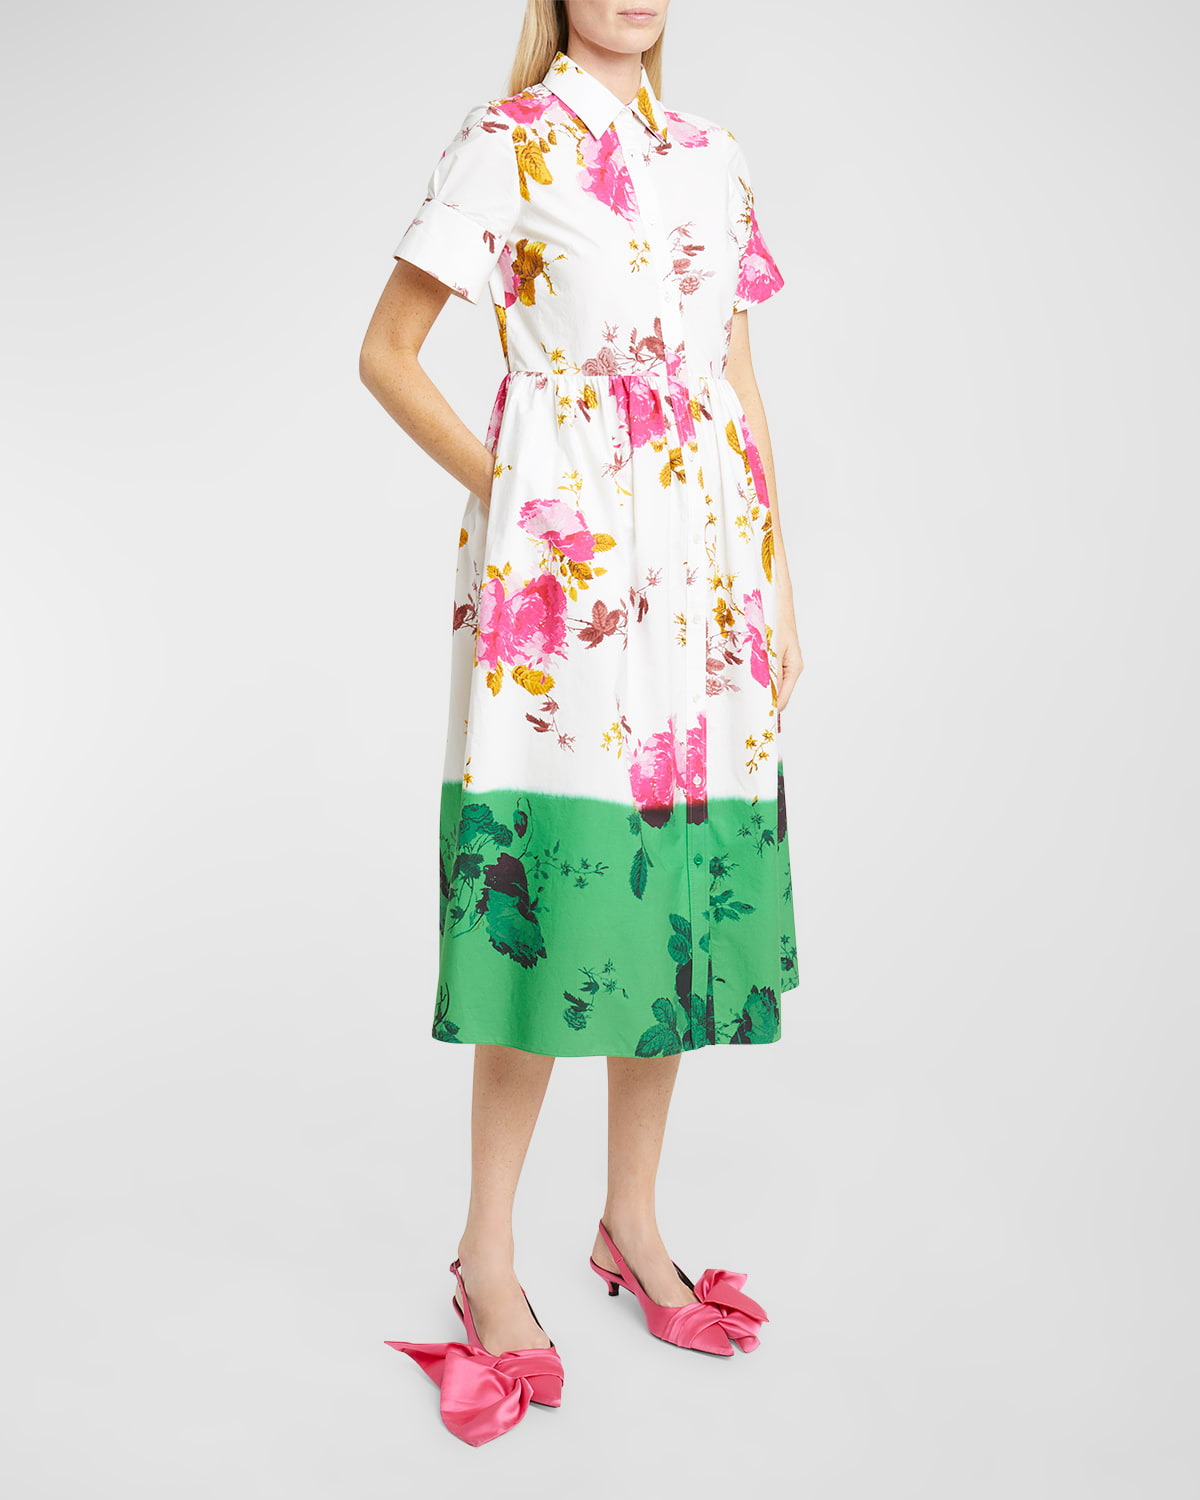 Erdem Dyed Floral Print Shirtdress In White + Kelly Green